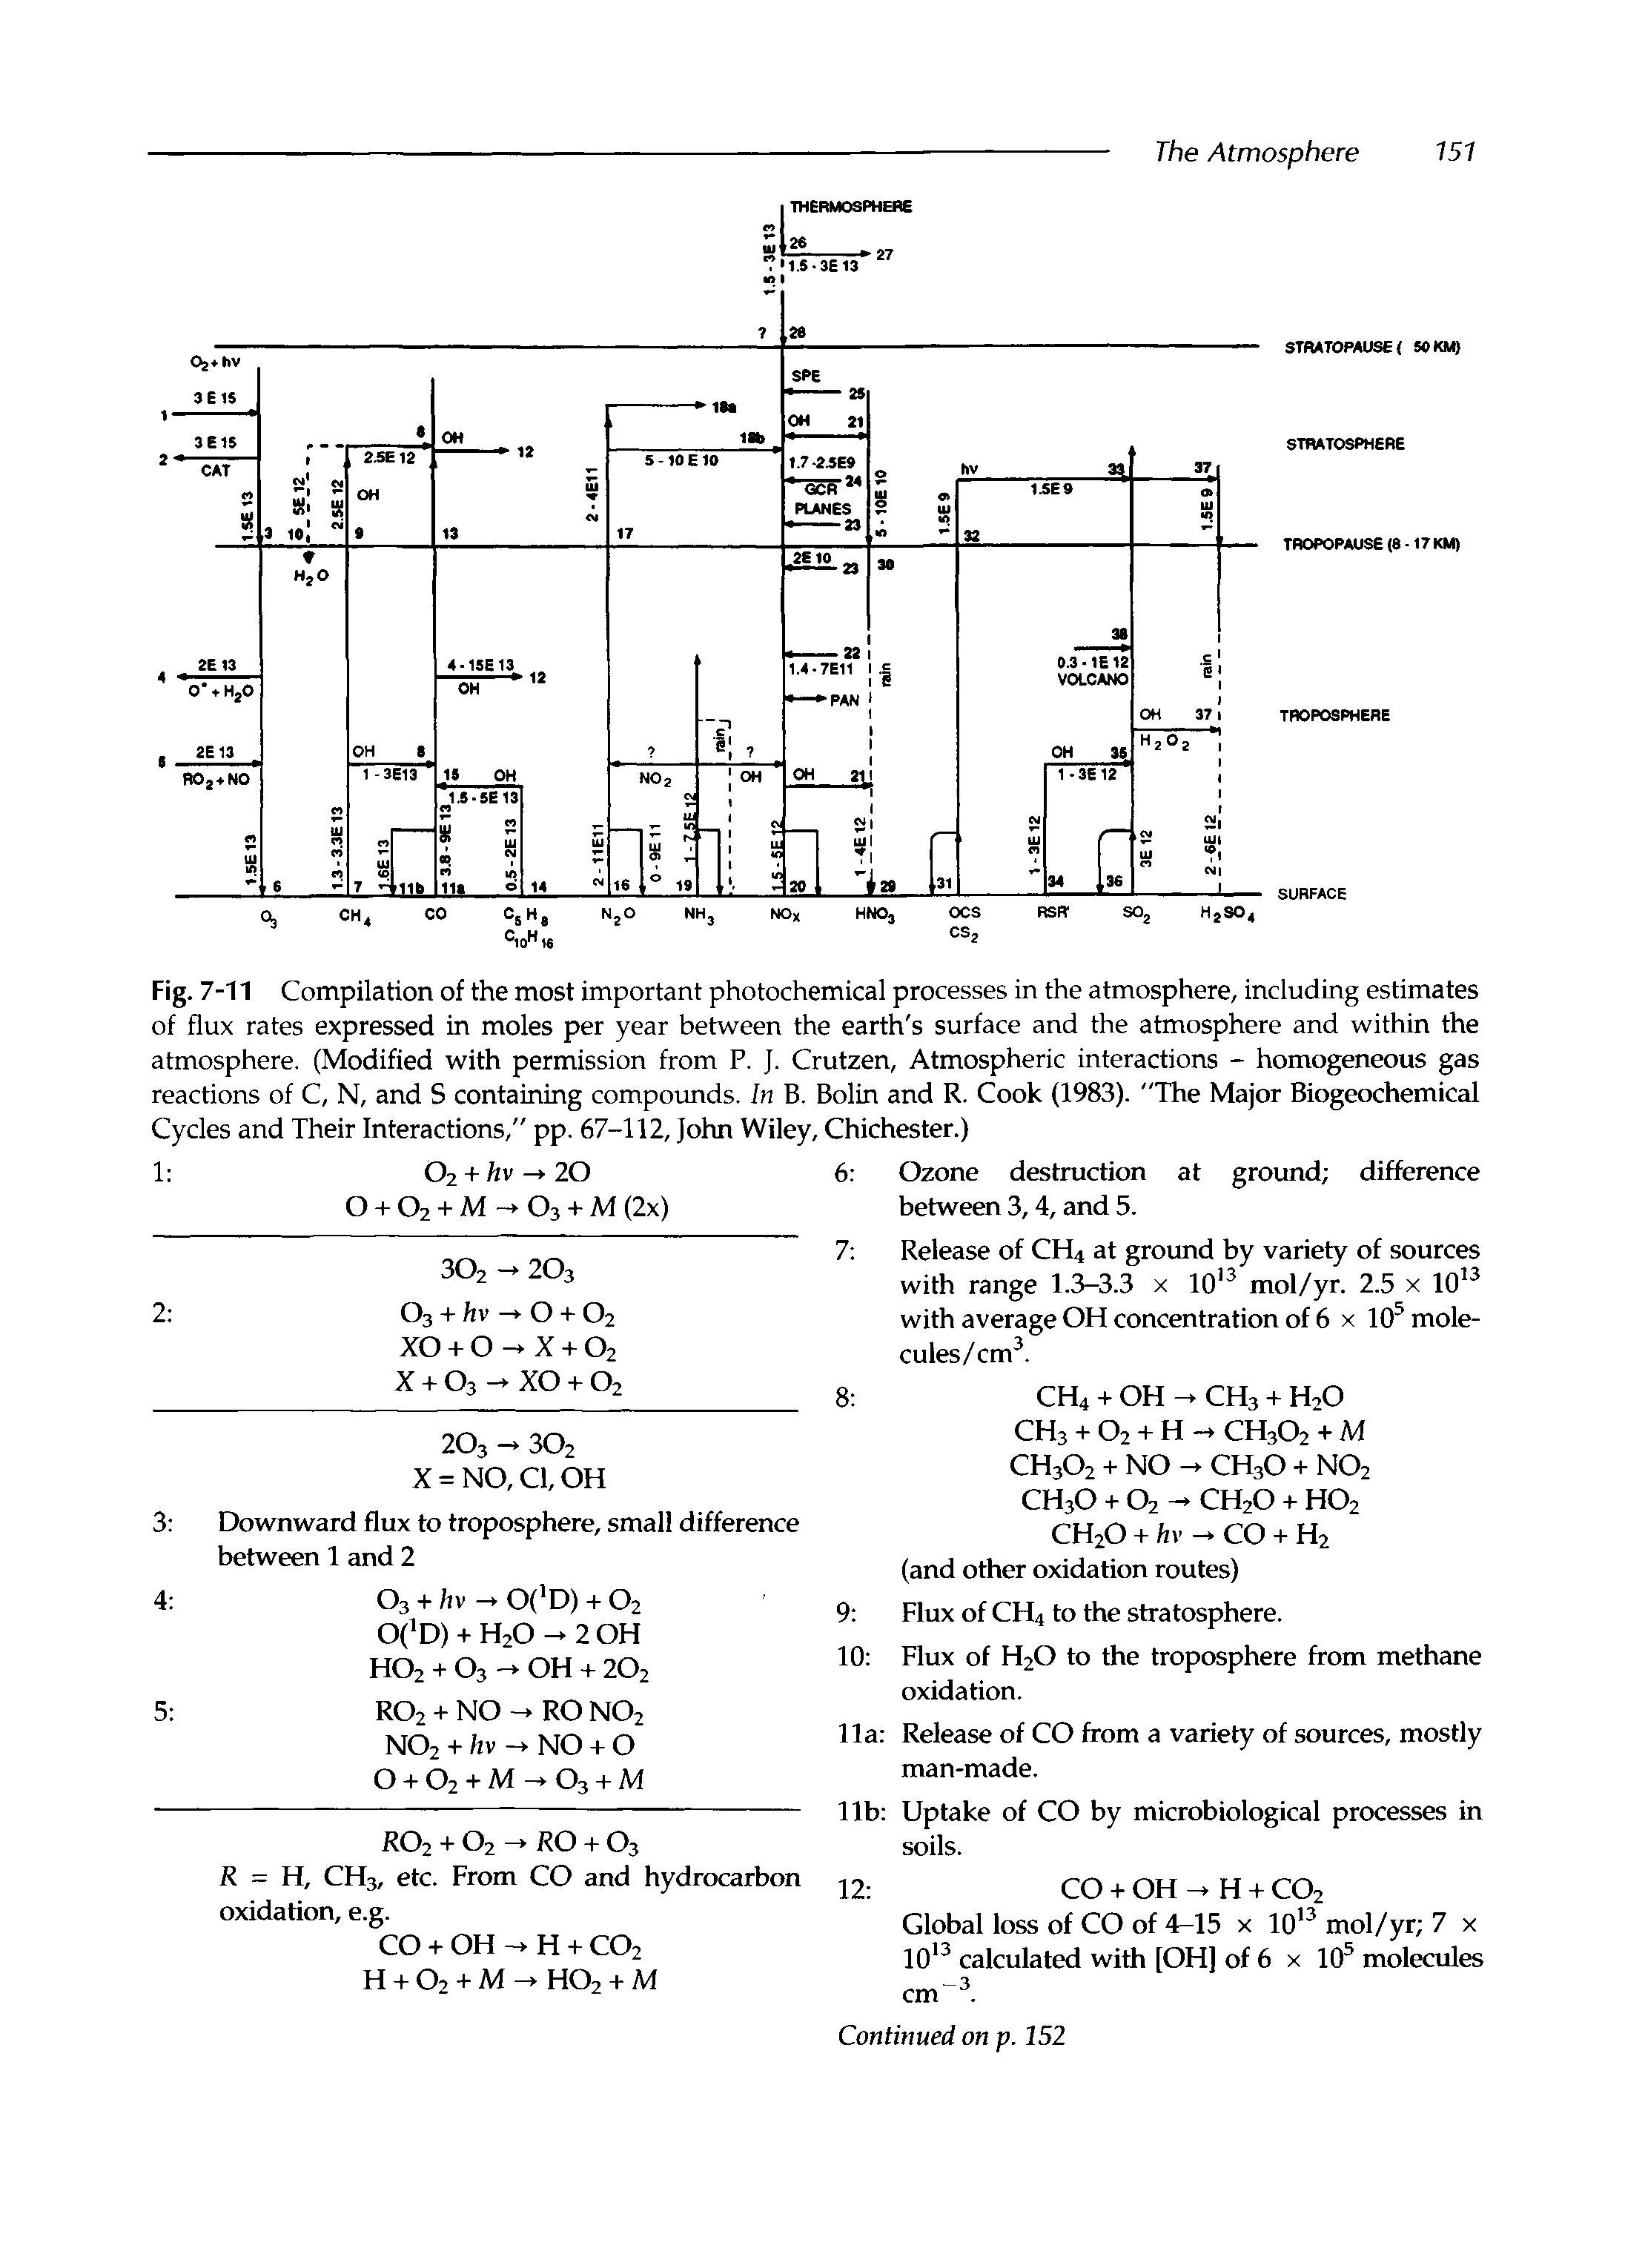 Fig. 7-11 Compilation of the most important photochemical processes in the atmosphere, including estimates of flux rates expressed in moles per year between the earth s surface and the atmosphere and within the atmosphere. (Modified with permission from P. J. Crutzen, Atmospheric interactions - homogeneous gas reactions of C, N, and S containing compounds. In B. Bolin and R. Cook (1983). "The Major Biogeochemical Cycles and Their Interactions," pp. 67-112, John Wiley, Chichester.)...